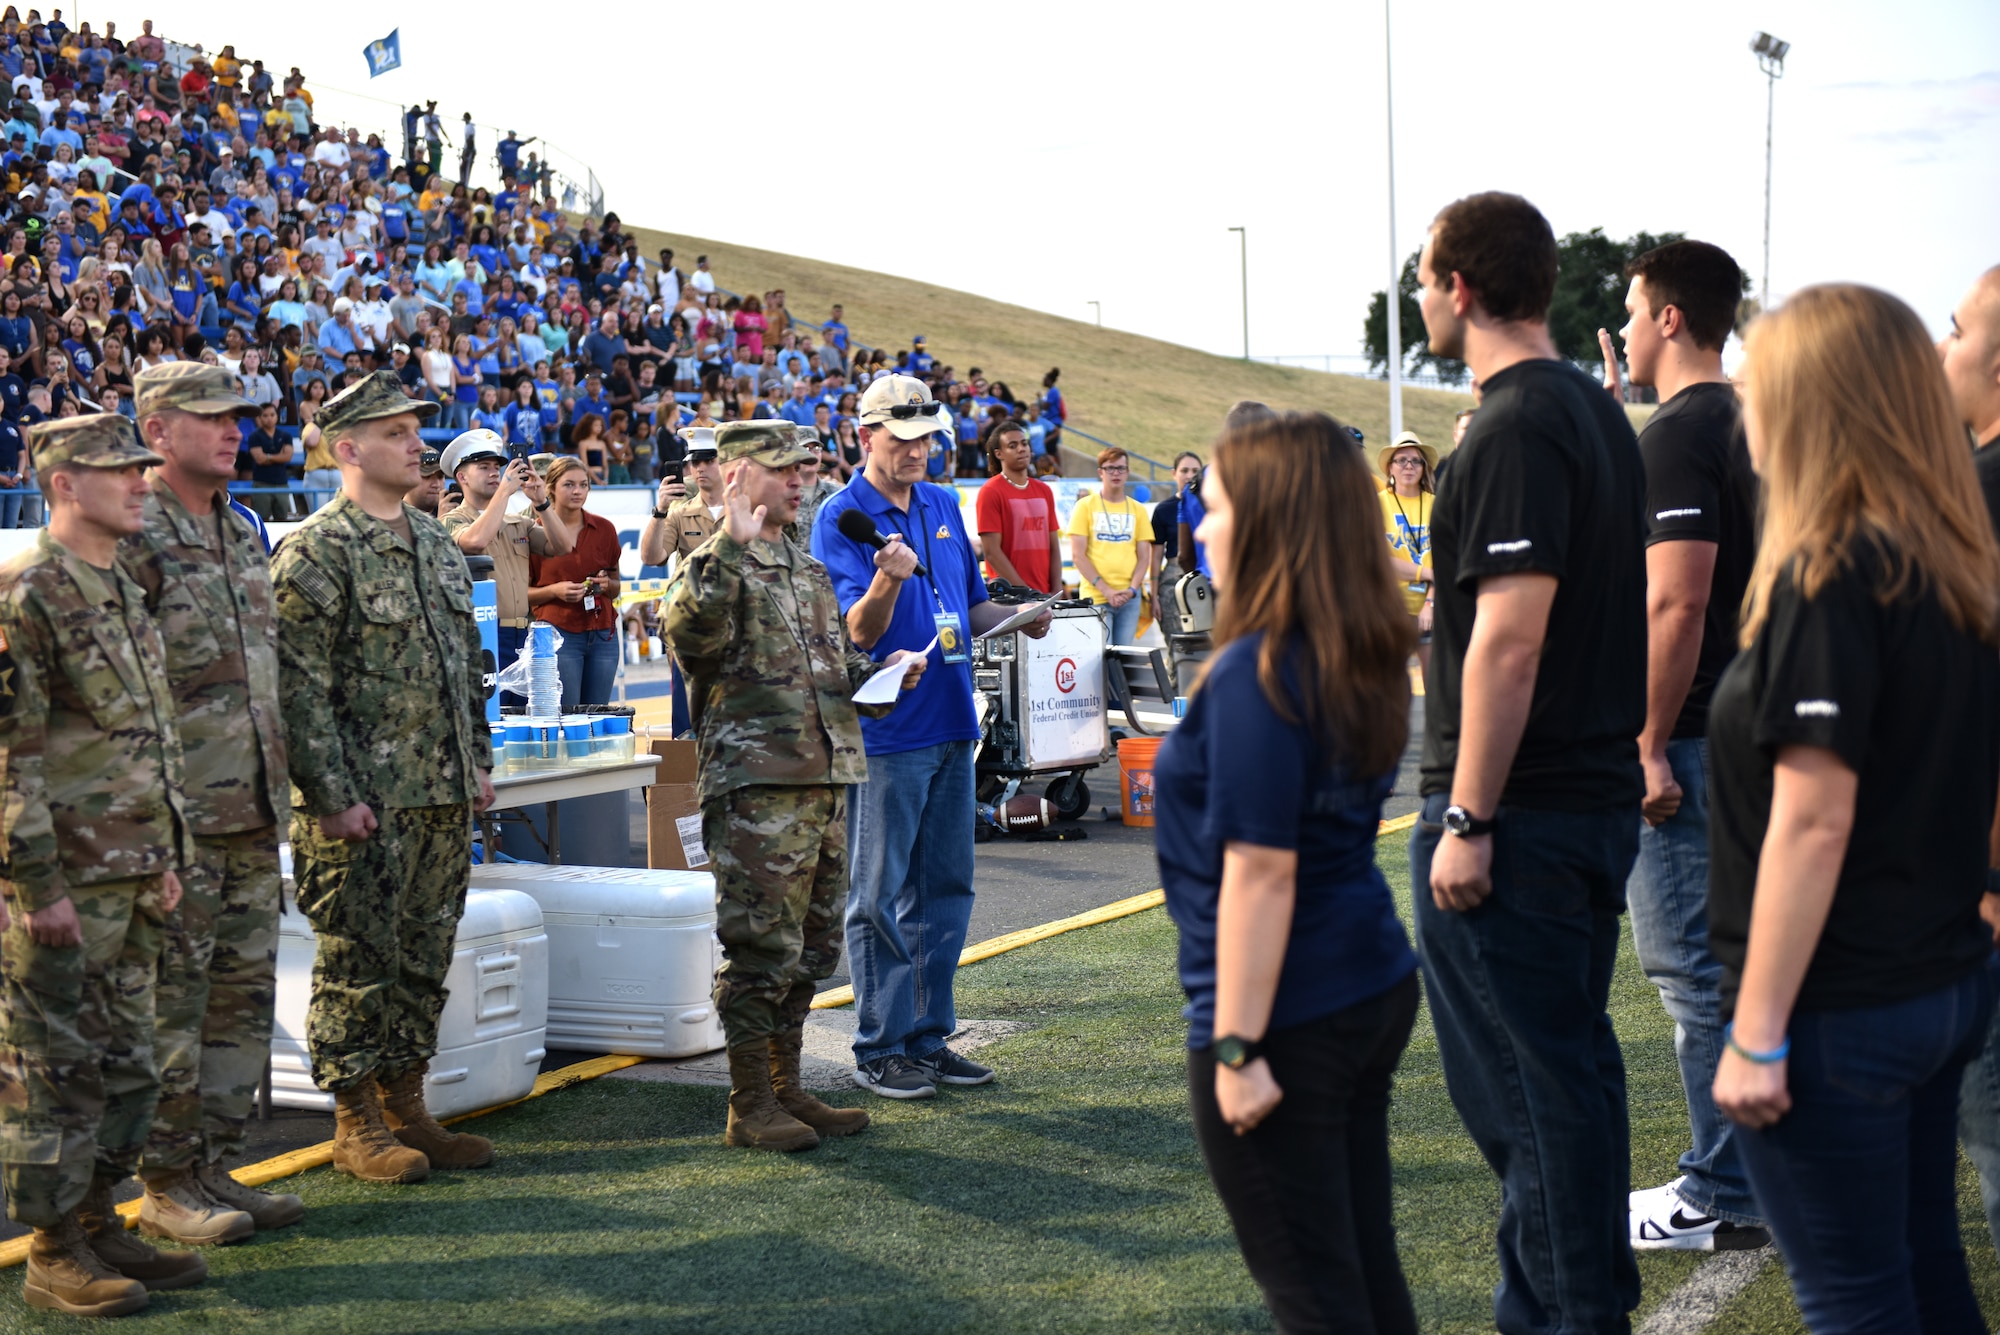 U.S. Air Force Col. Andres Nazario, 17th Training Wing commander, performs the oath of enlistment during the halftime show of the Angelo State University vs Simon Fraser University game at the 1st Community Credit Union Field, San Angelo, Texas, Sept. 14, 2019. ASU held their annual military appreciation night where military members and their famlies could attend the game. (U.S. Air Force photo by Senior Airman Seraiah Wolf/Released)